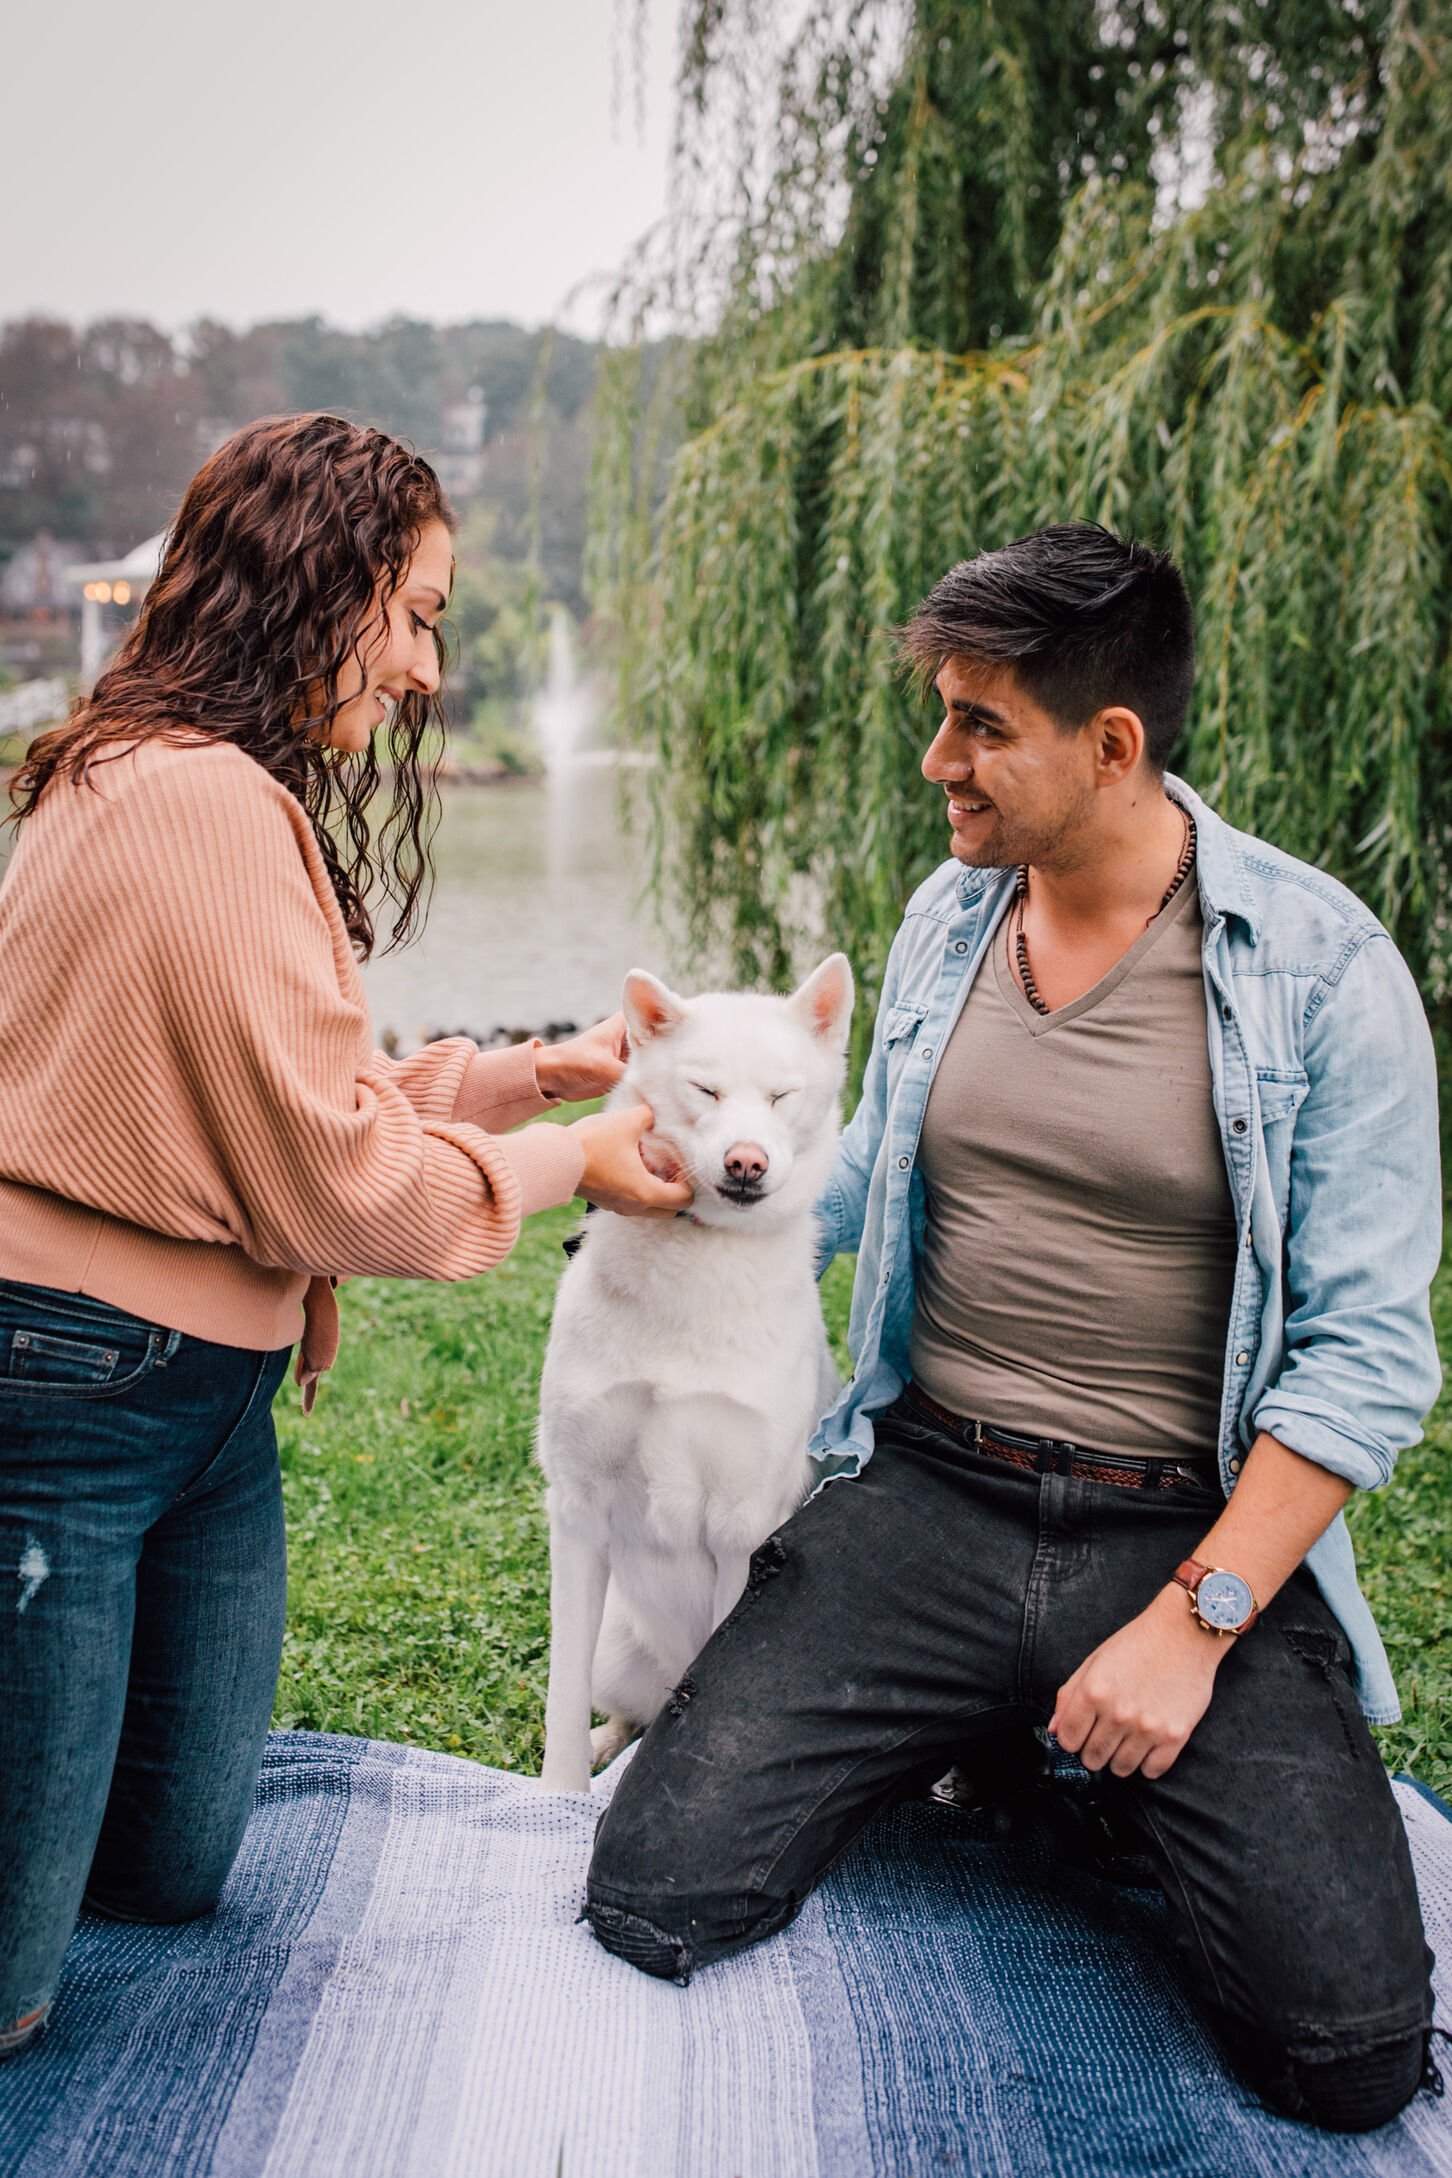  jessica pets their dog while pablo looks intently at her while they take engagement photos with a dog 